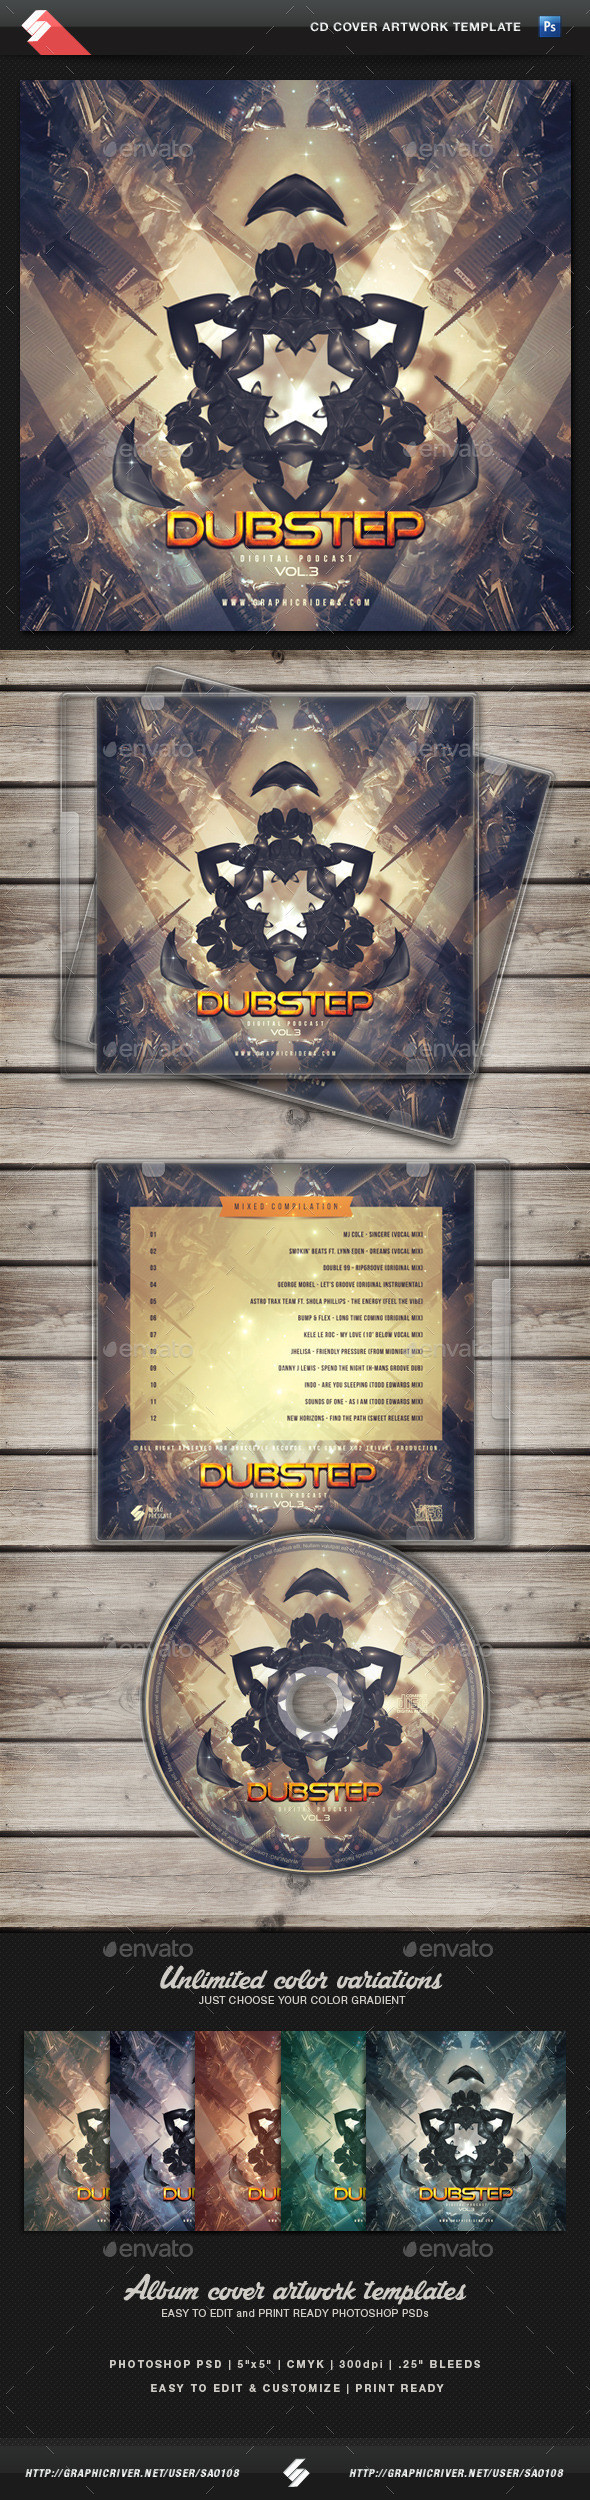 Aliendubstep cd cover template preview